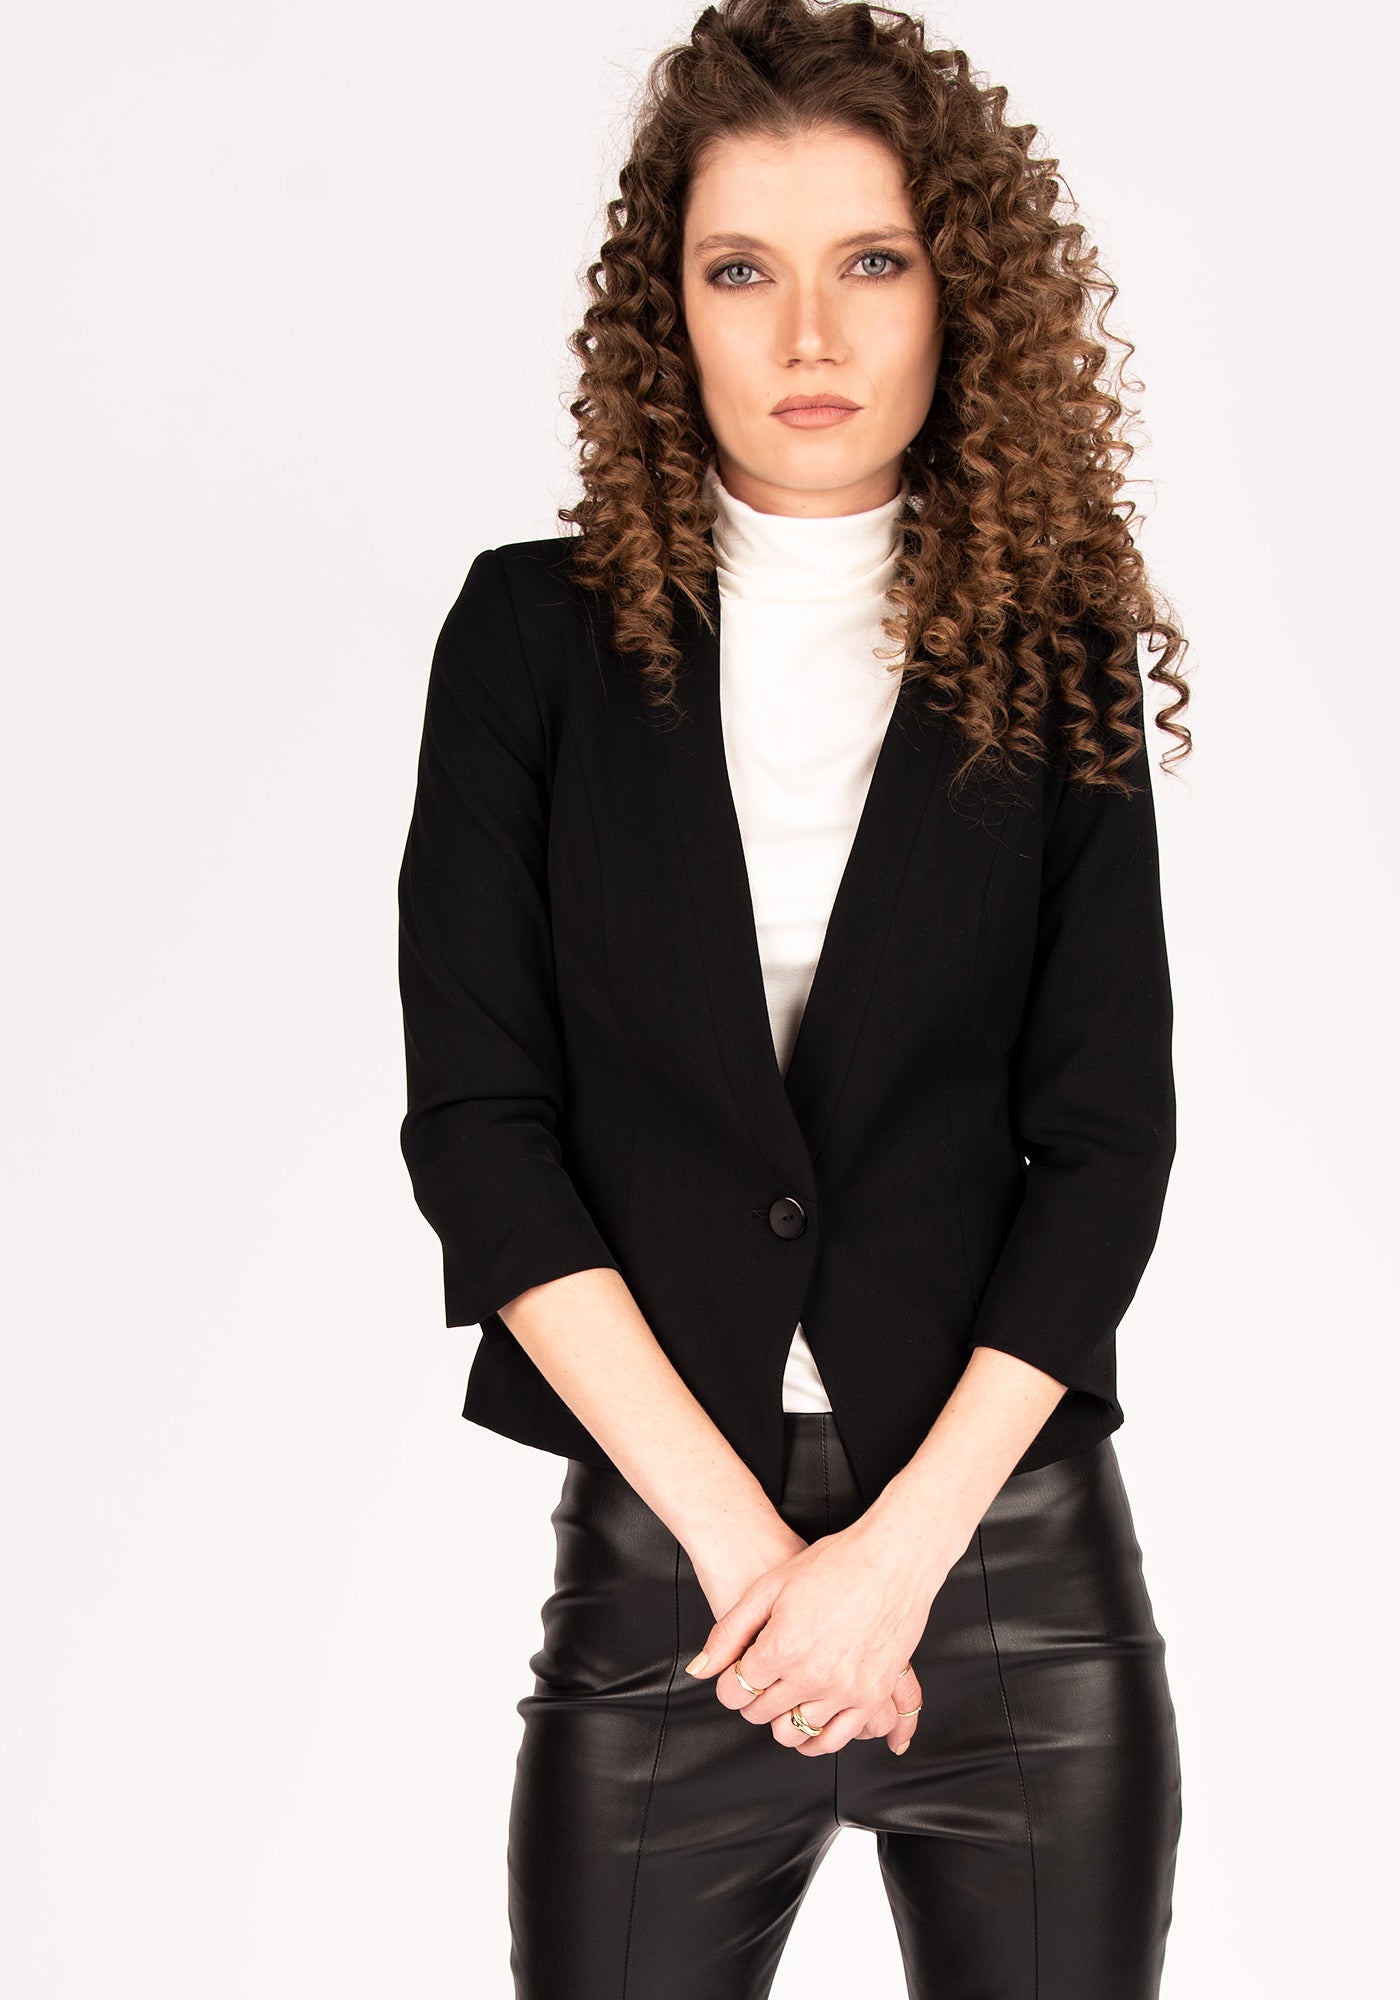 Women's Tailored Single breasted Blazer with Cropped Sleeves in Black